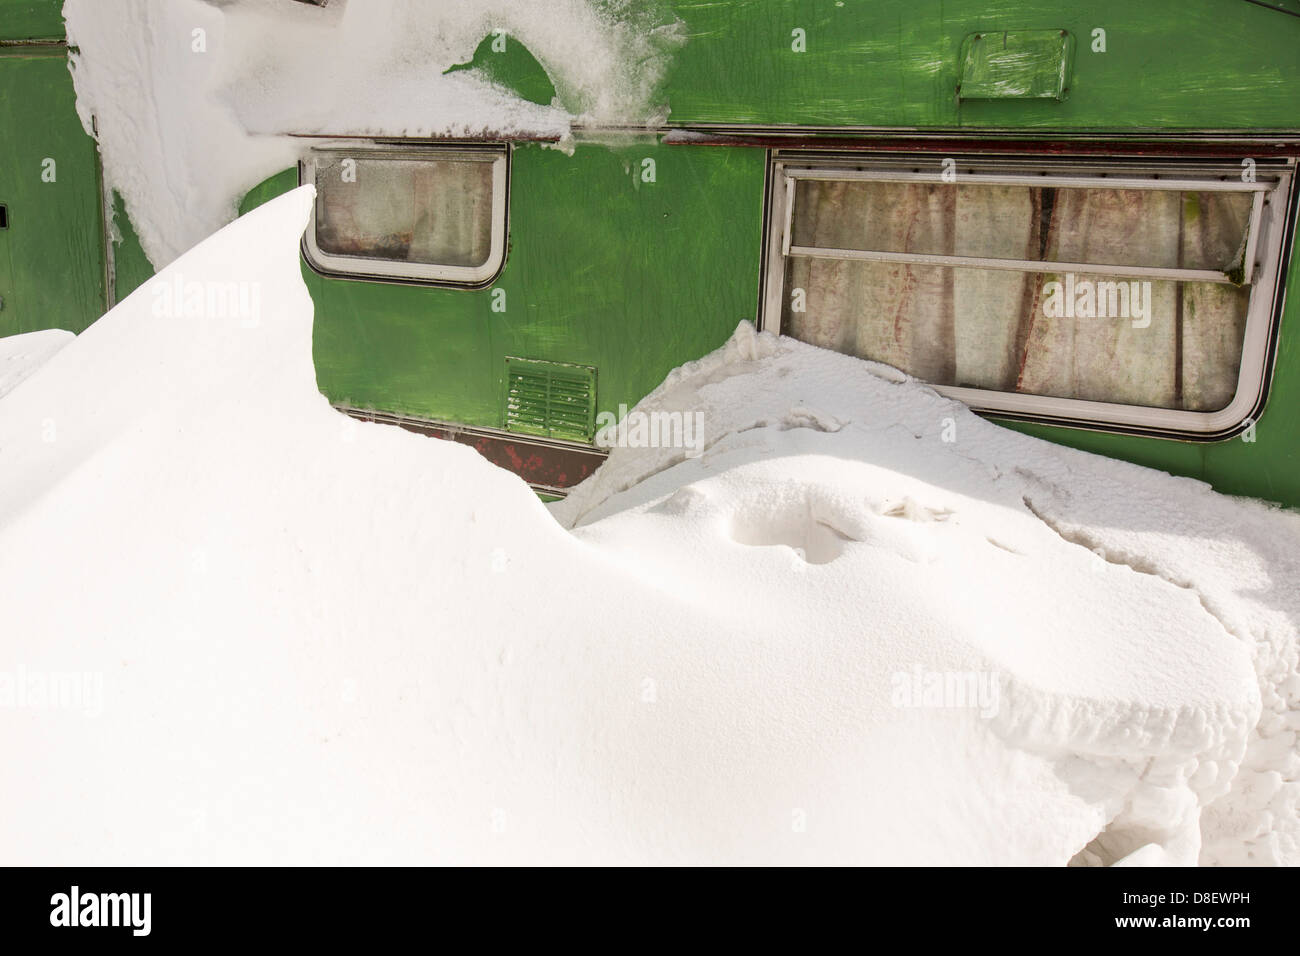 A caravan snowed in by large snow drifts during the extreme weather event of late March 2013, near Ambleside, Stock Photo